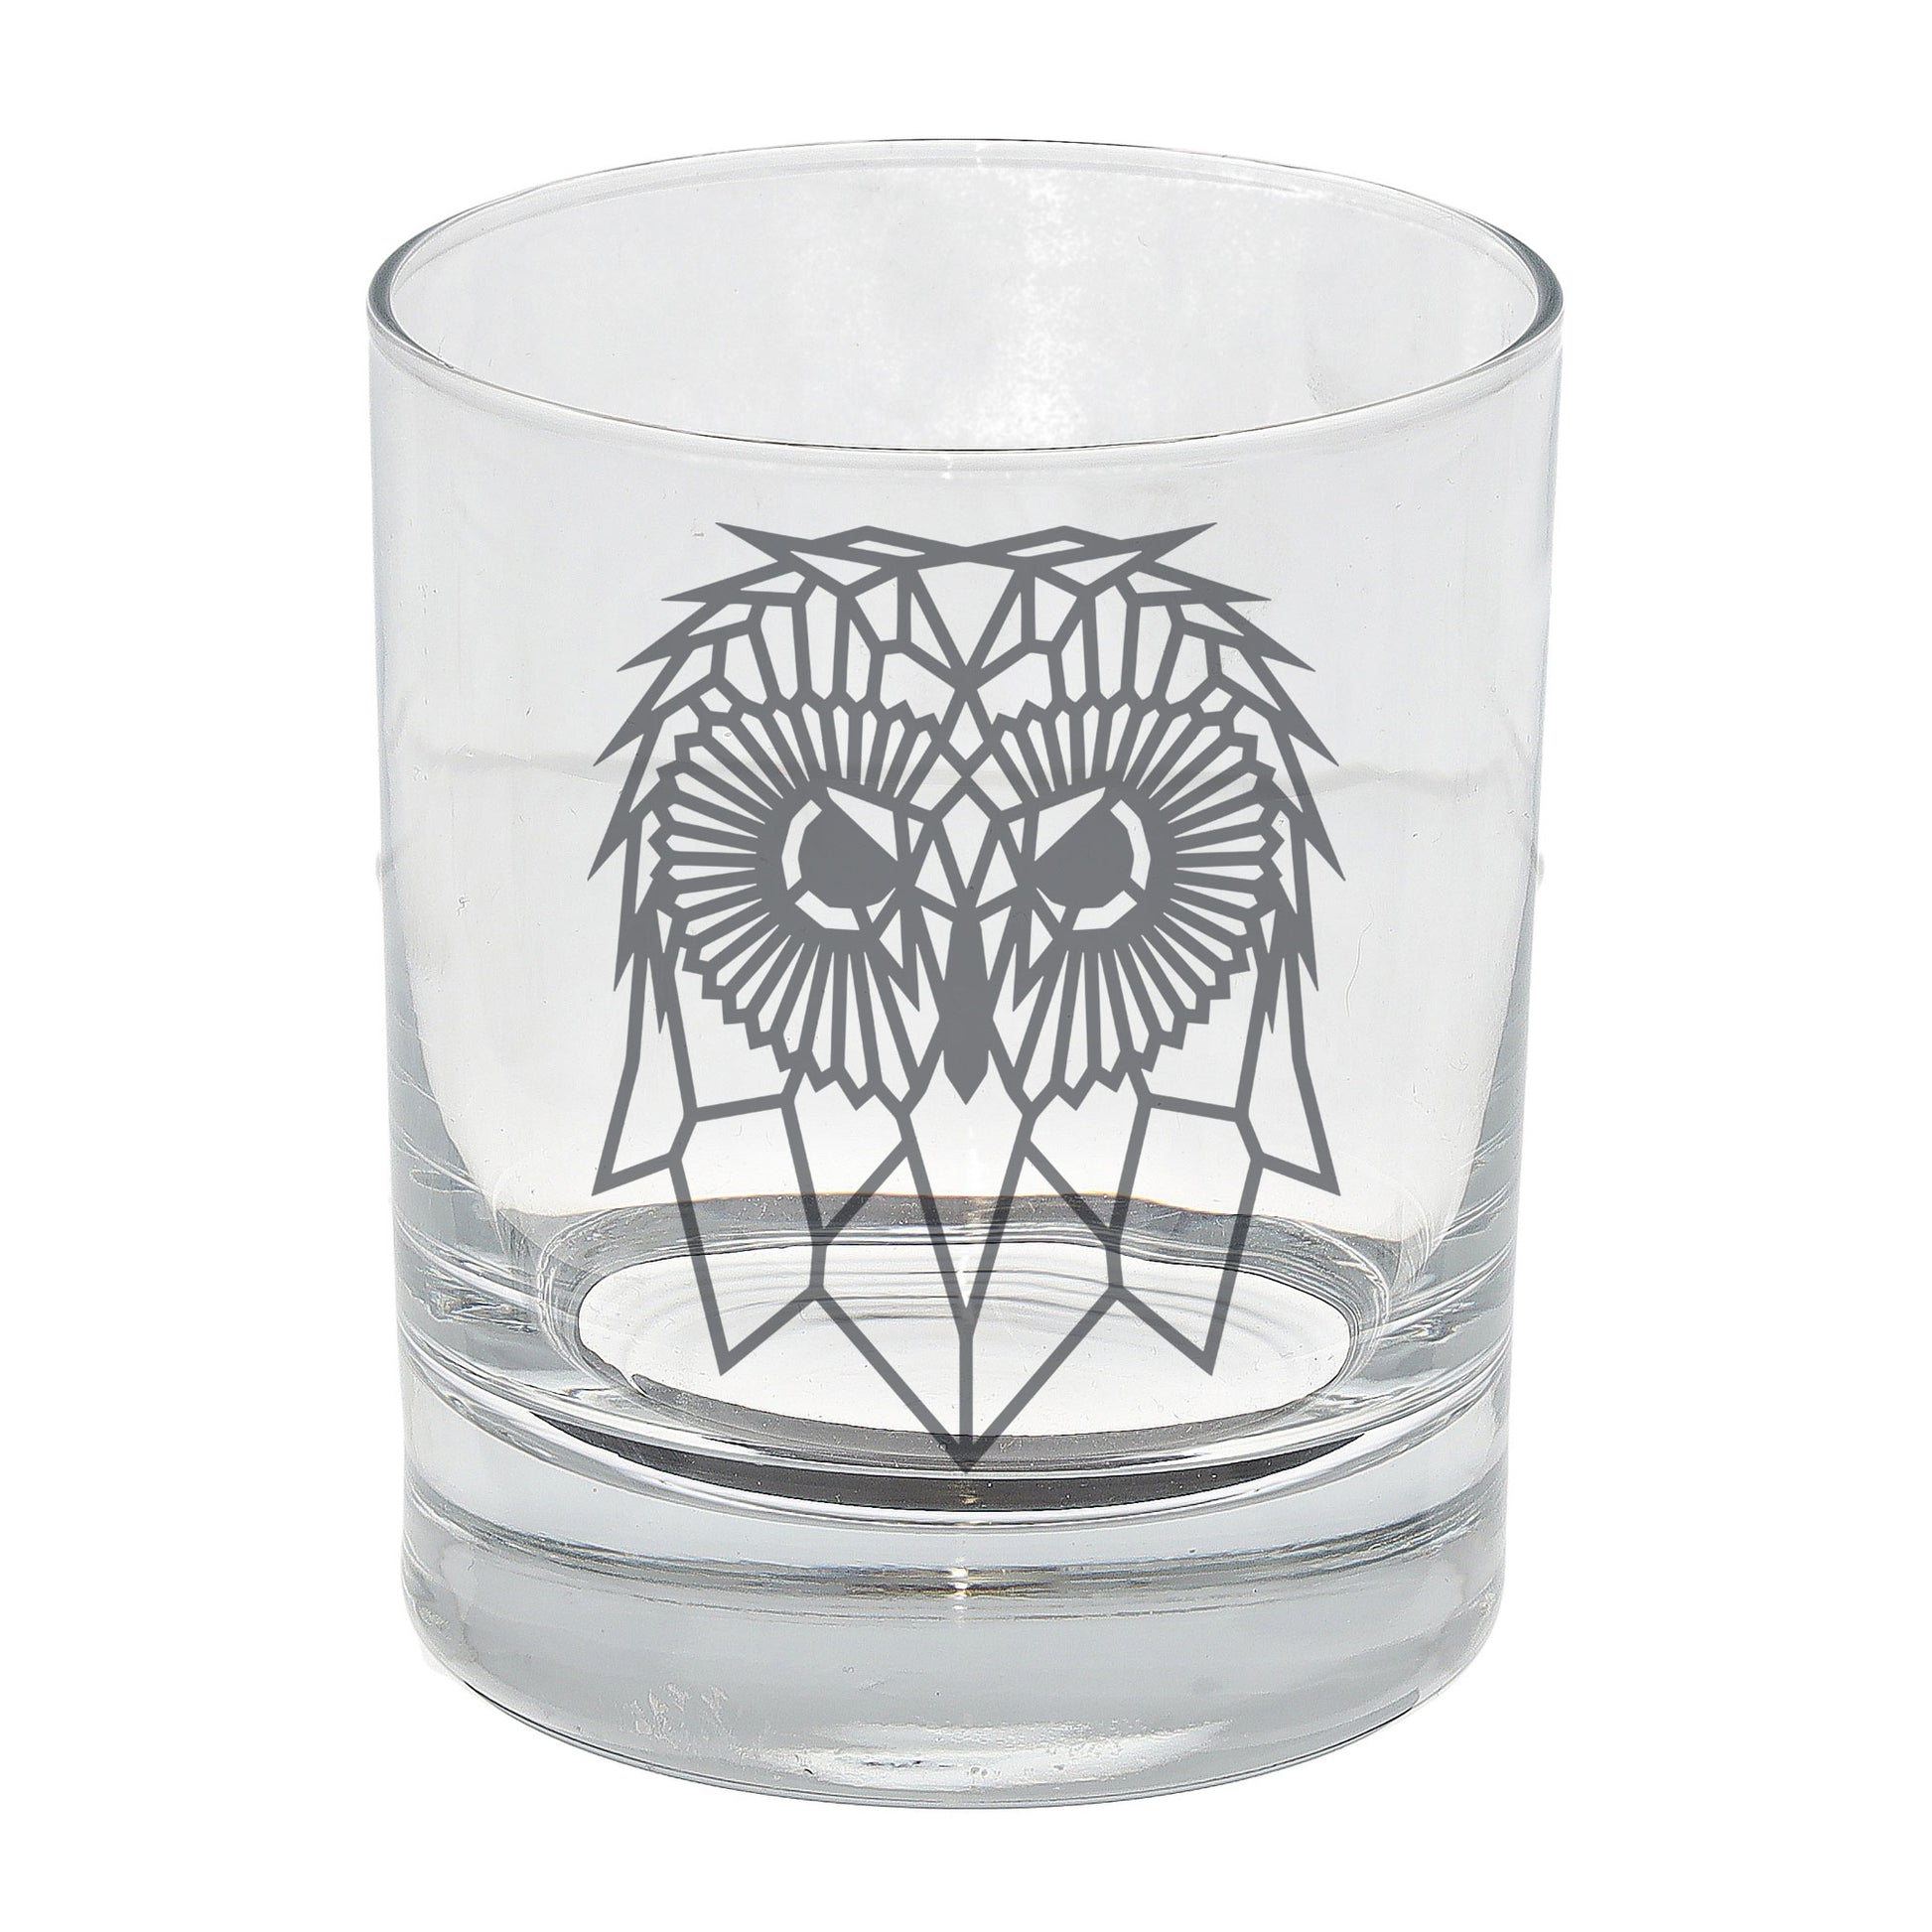 Cute Owl Engraved Whisky Glass  - Always Looking Good -   